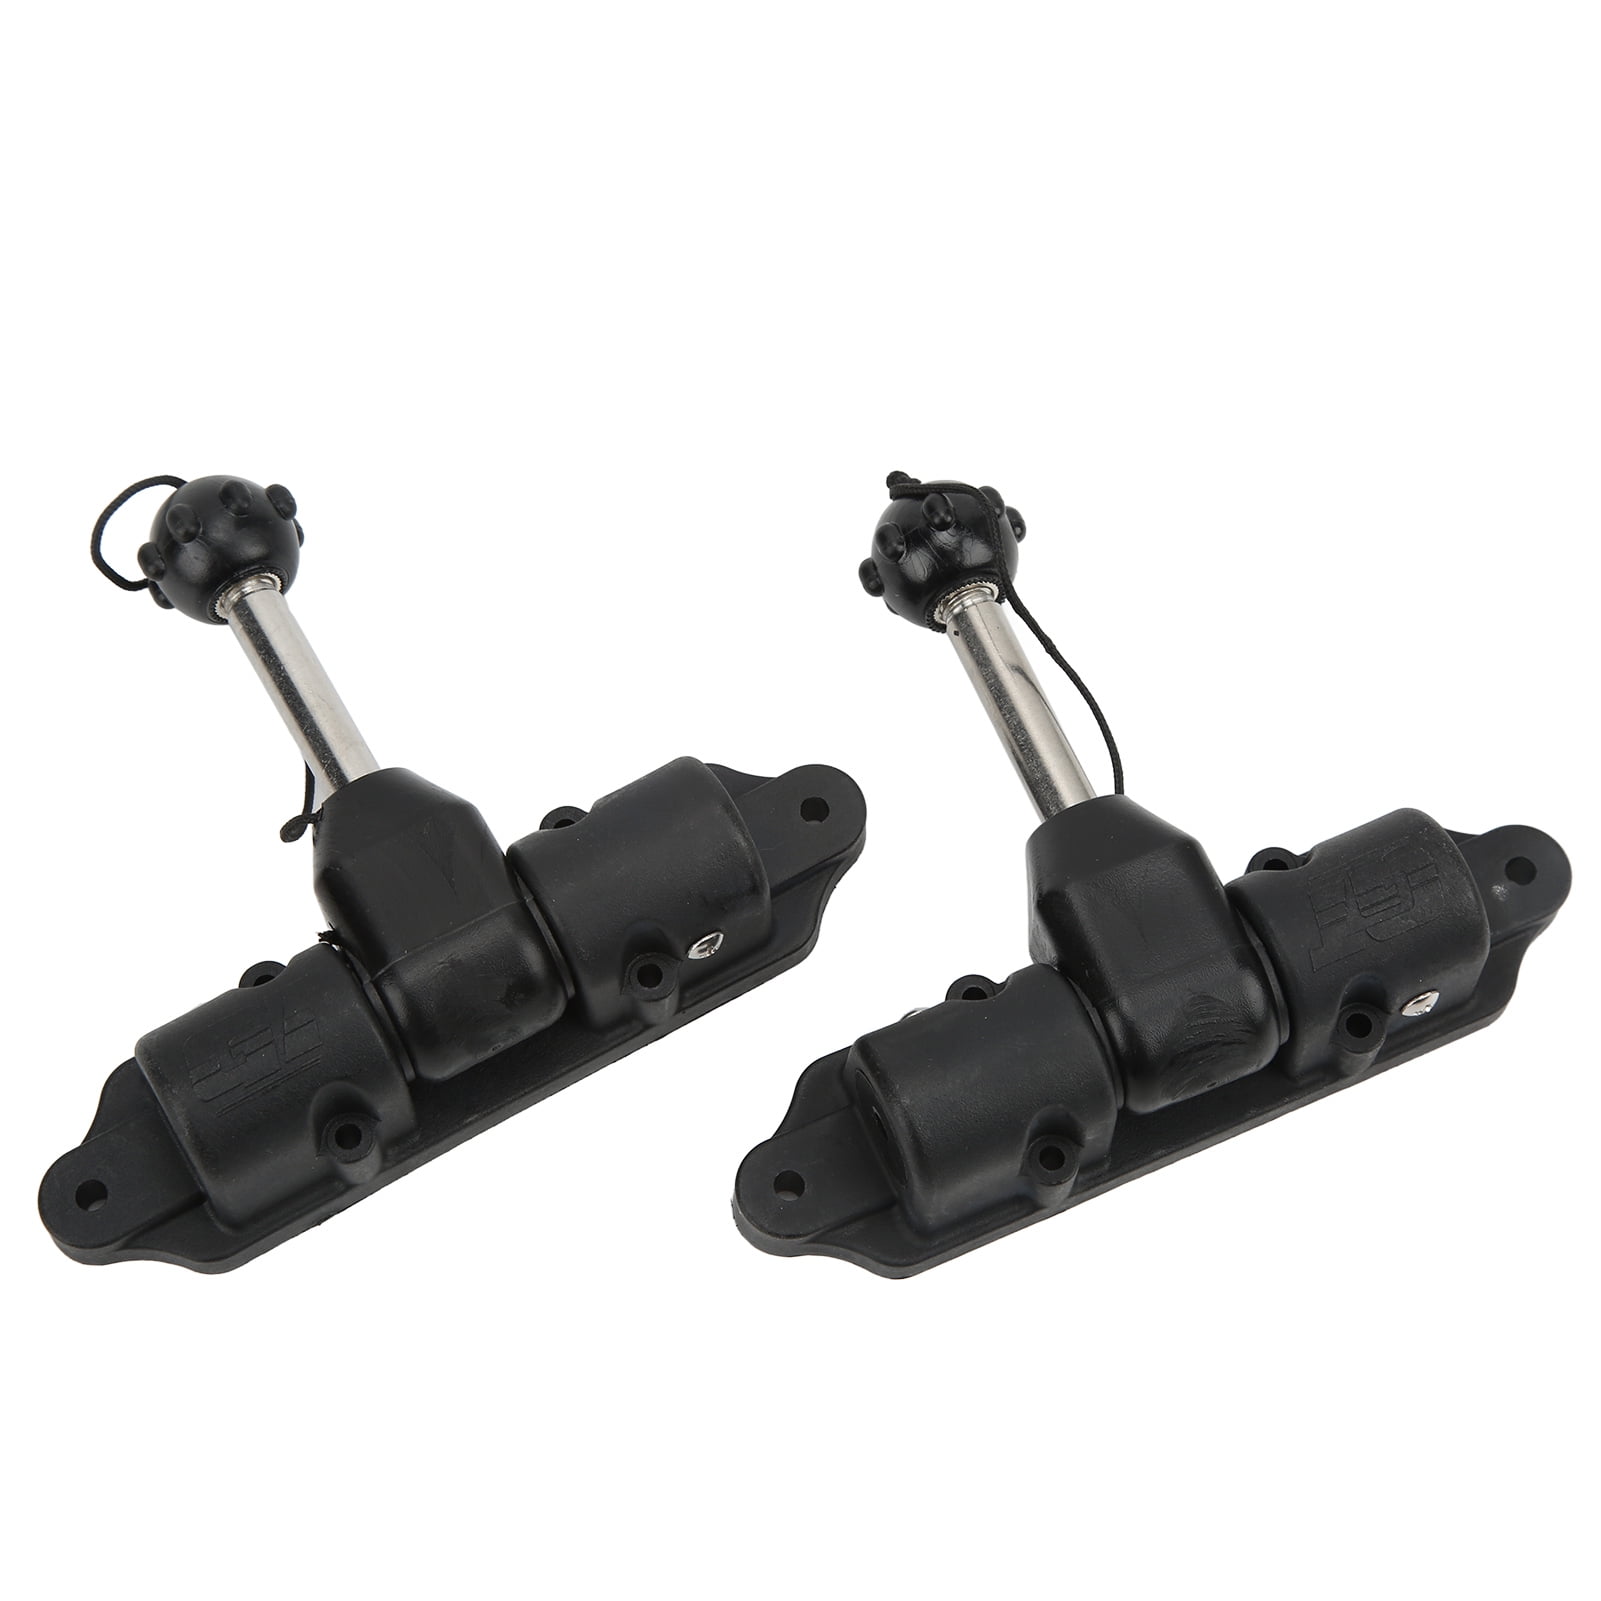 2 PCS PVC Inflatable Boat Oar Lock Patch Paddle Holder for Kayak Raft Dinghy 